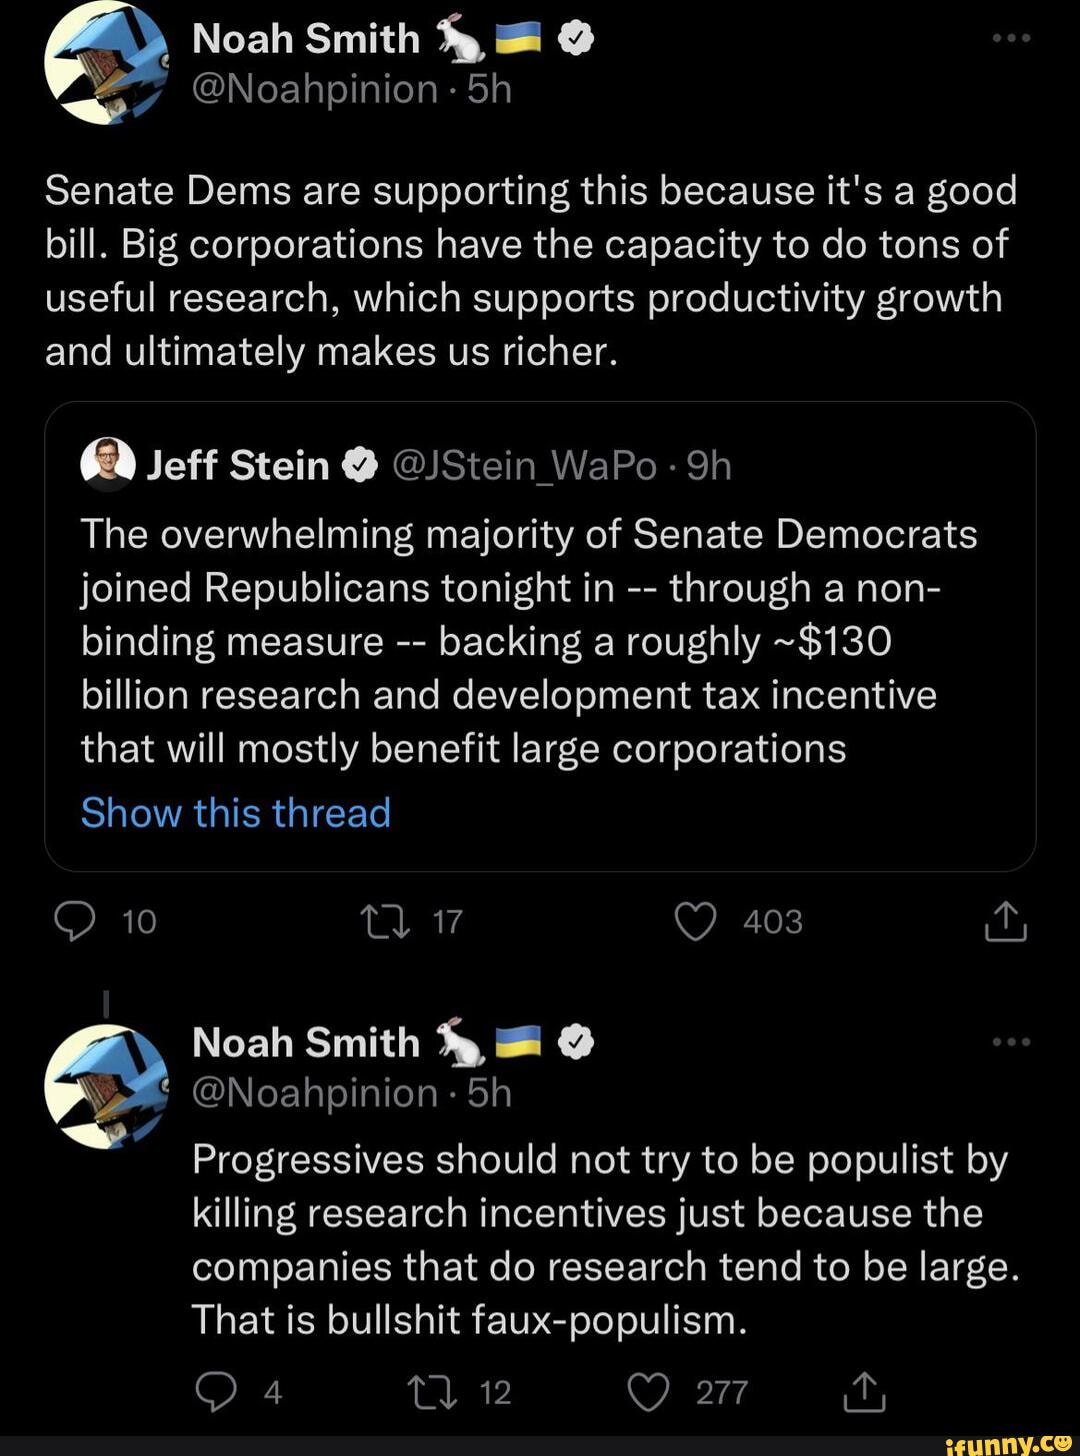 noah-smith-ty-noahpinion-senate-dems-are-supporting-this-because-it-s